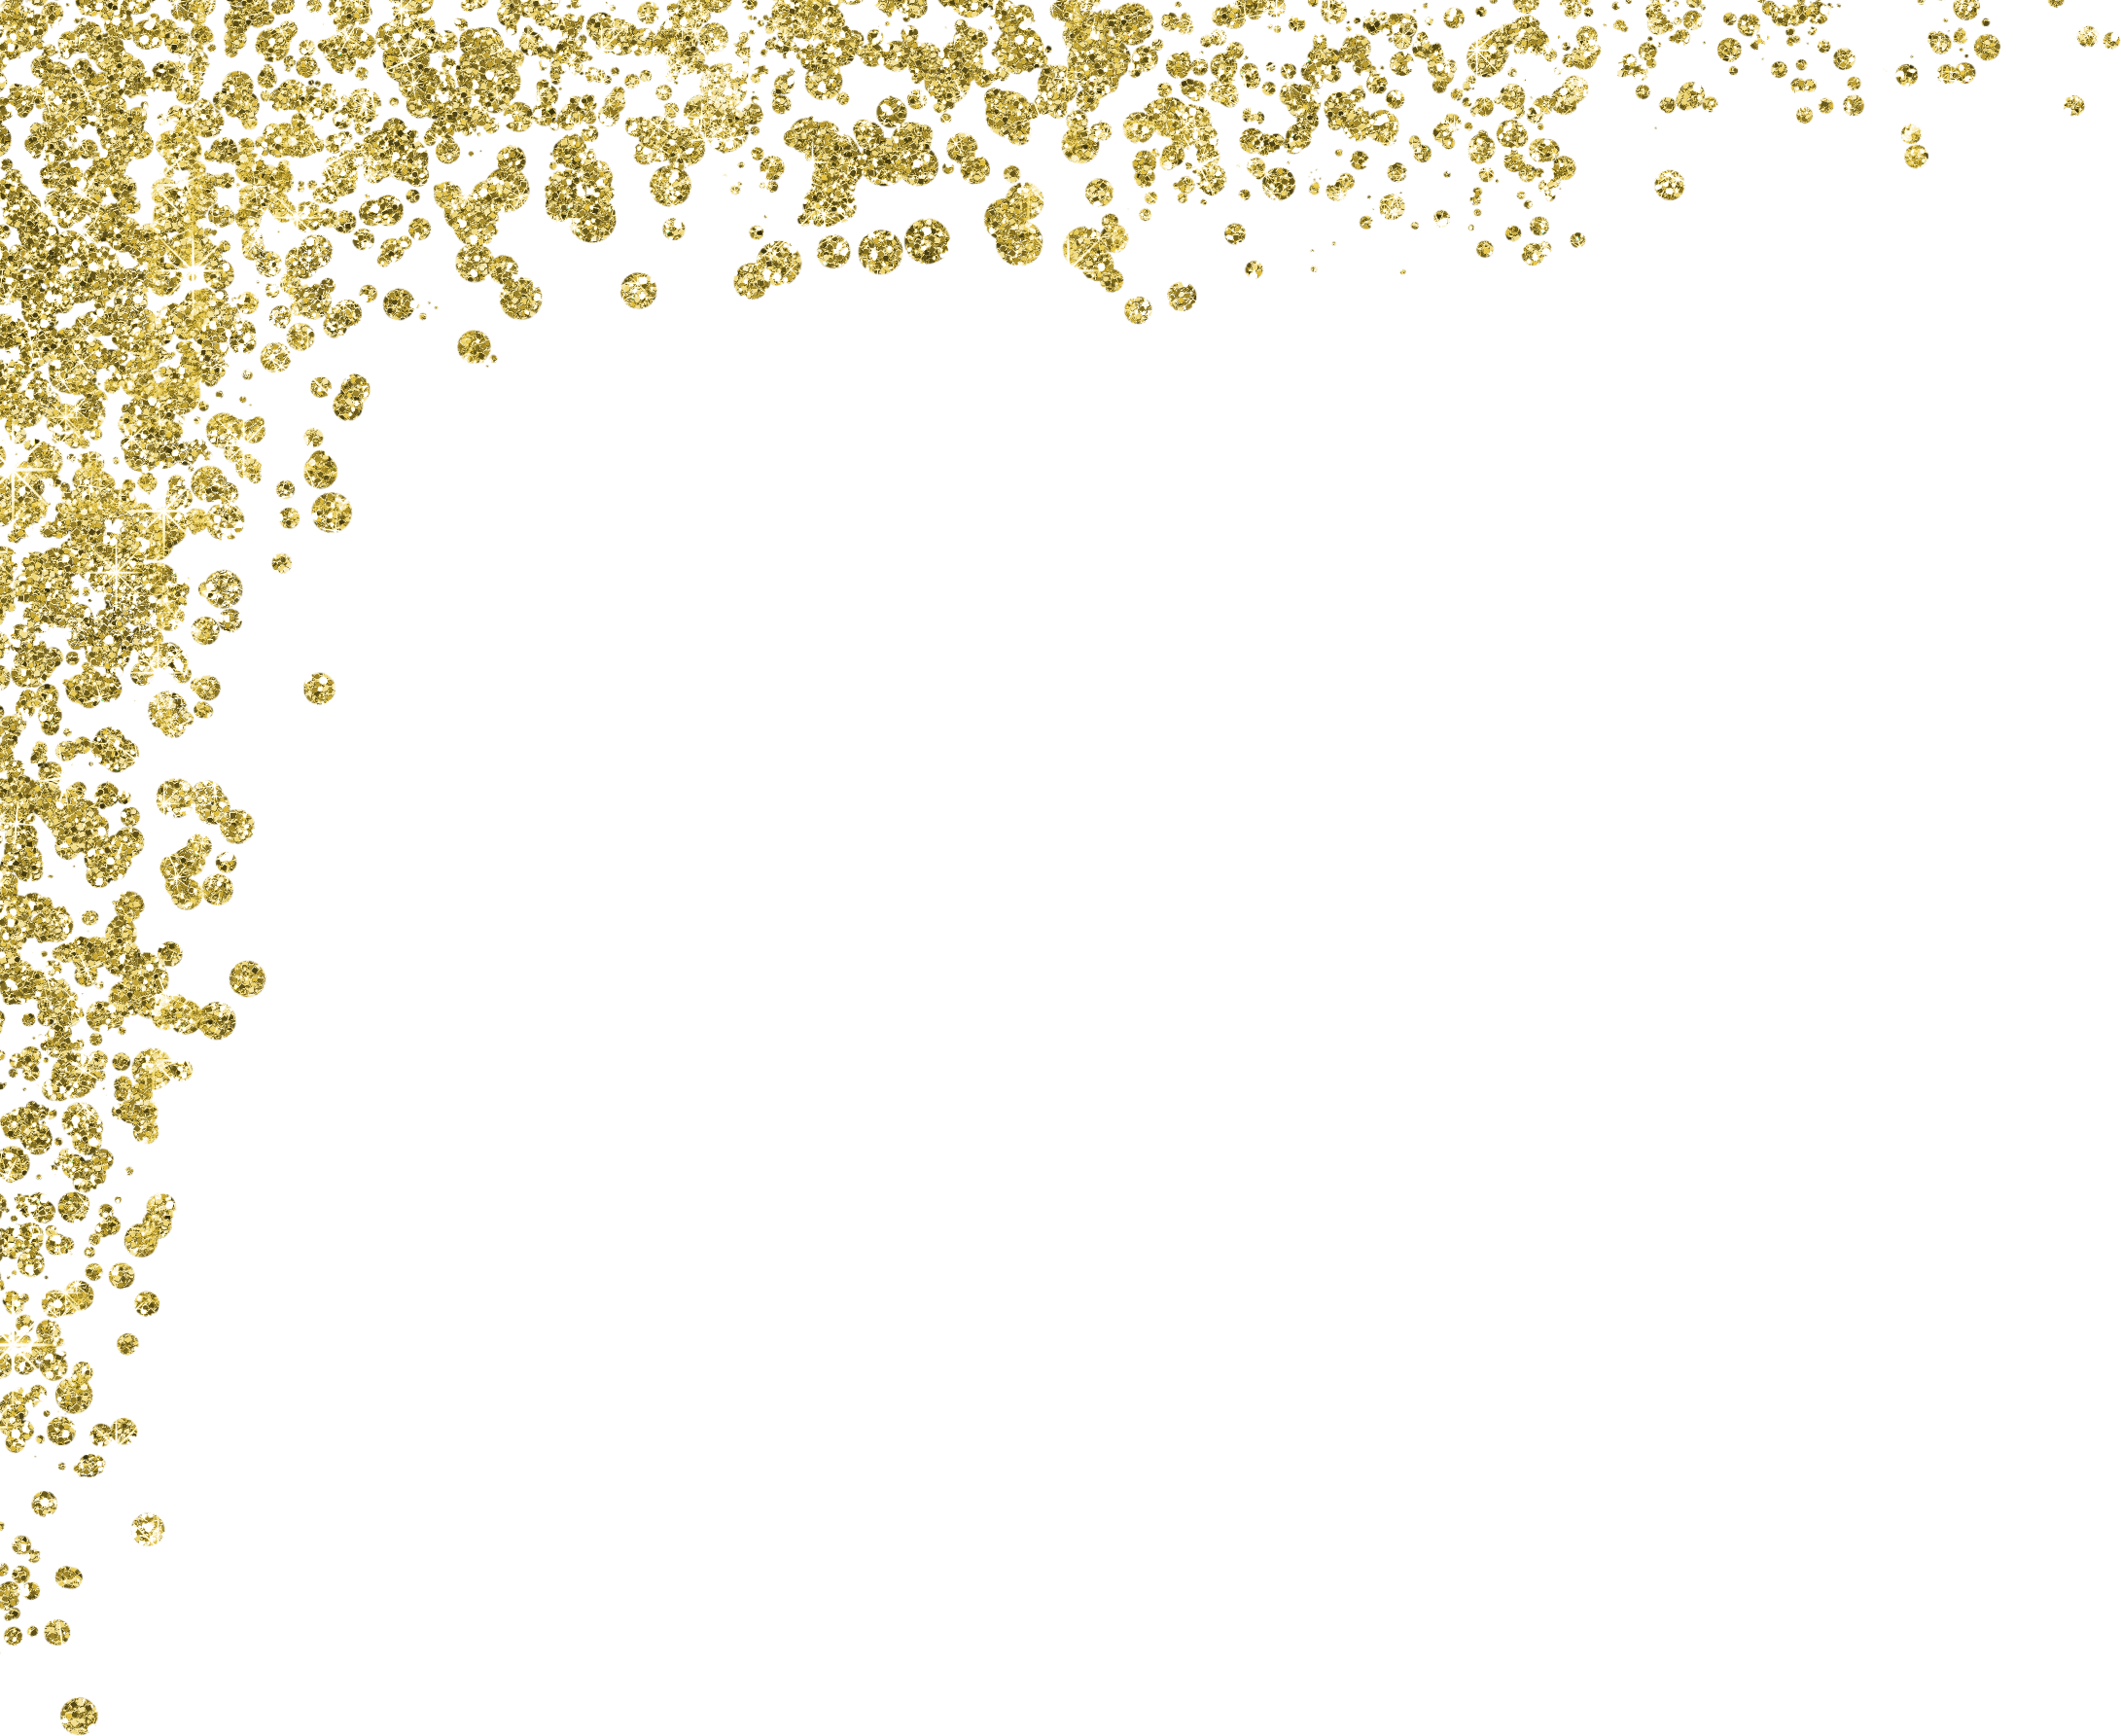 Gold Glitter Material - gold png download - 2181*1785 - Free ...